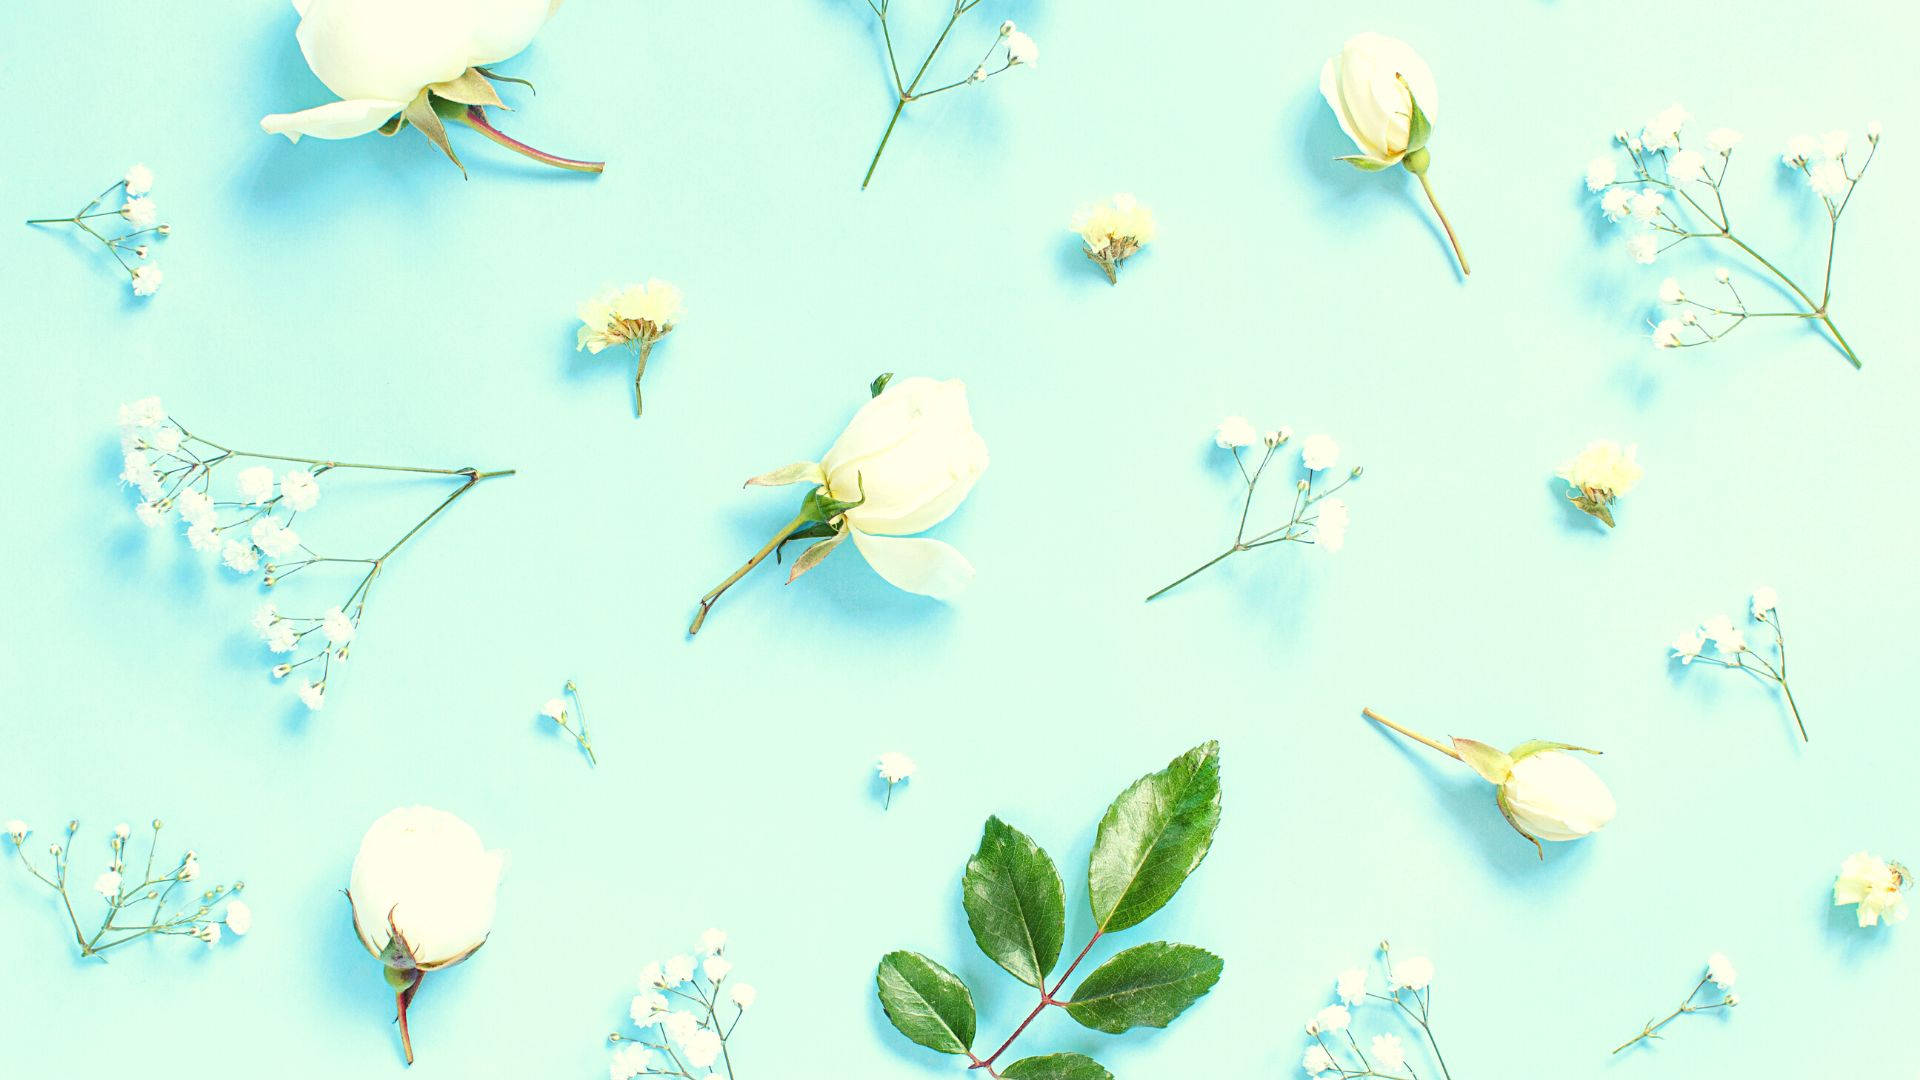 A sweet light blue background perfect for a peaceful day Wallpaper